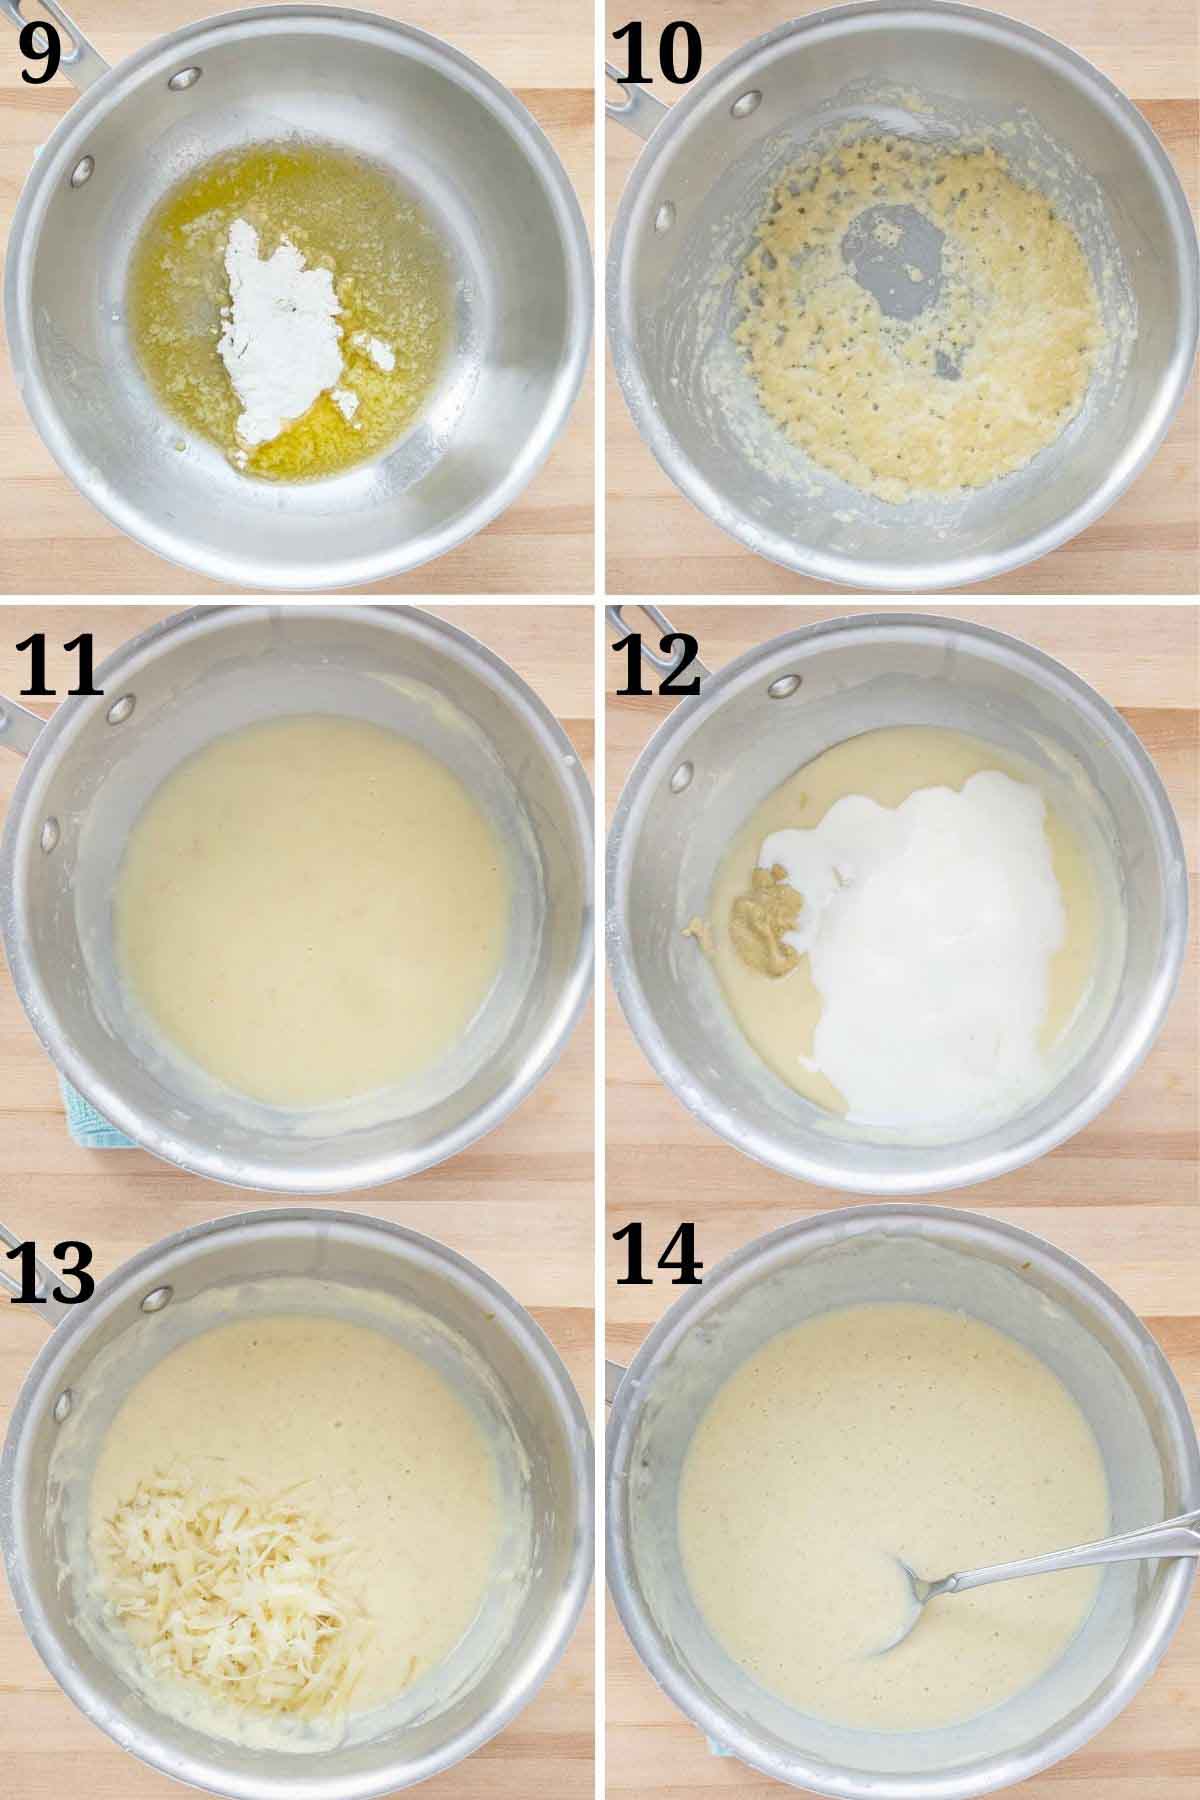 six images showing how to make a dijon sauce with gruyere cheese